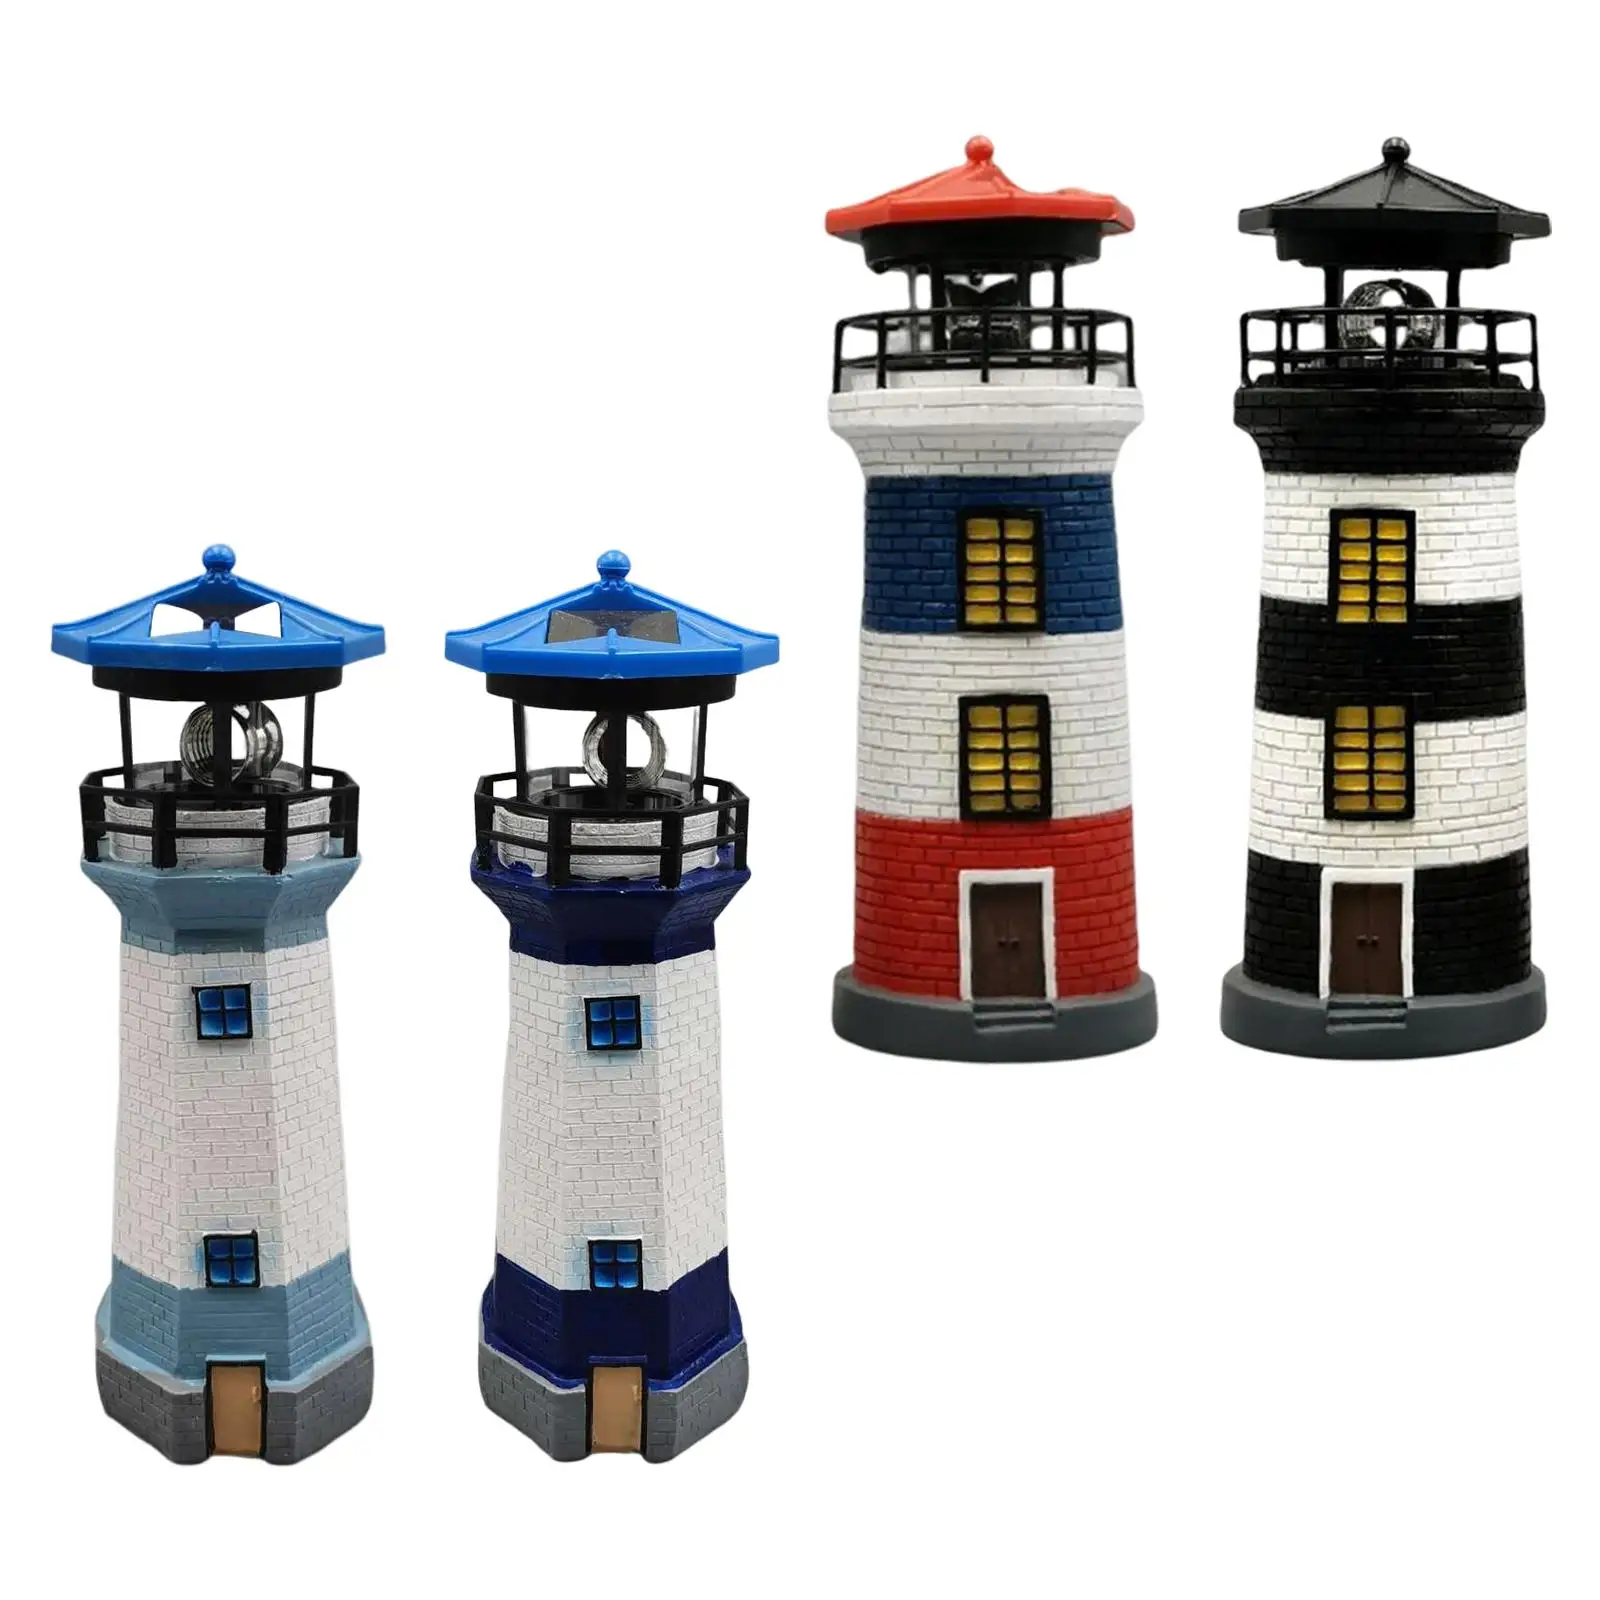 Wind Mill Solar Lighthouse Ornaments Garden Lights Resin Premium Waterproof 360 Degree Rotating for Garden Outdoor Party Balcony